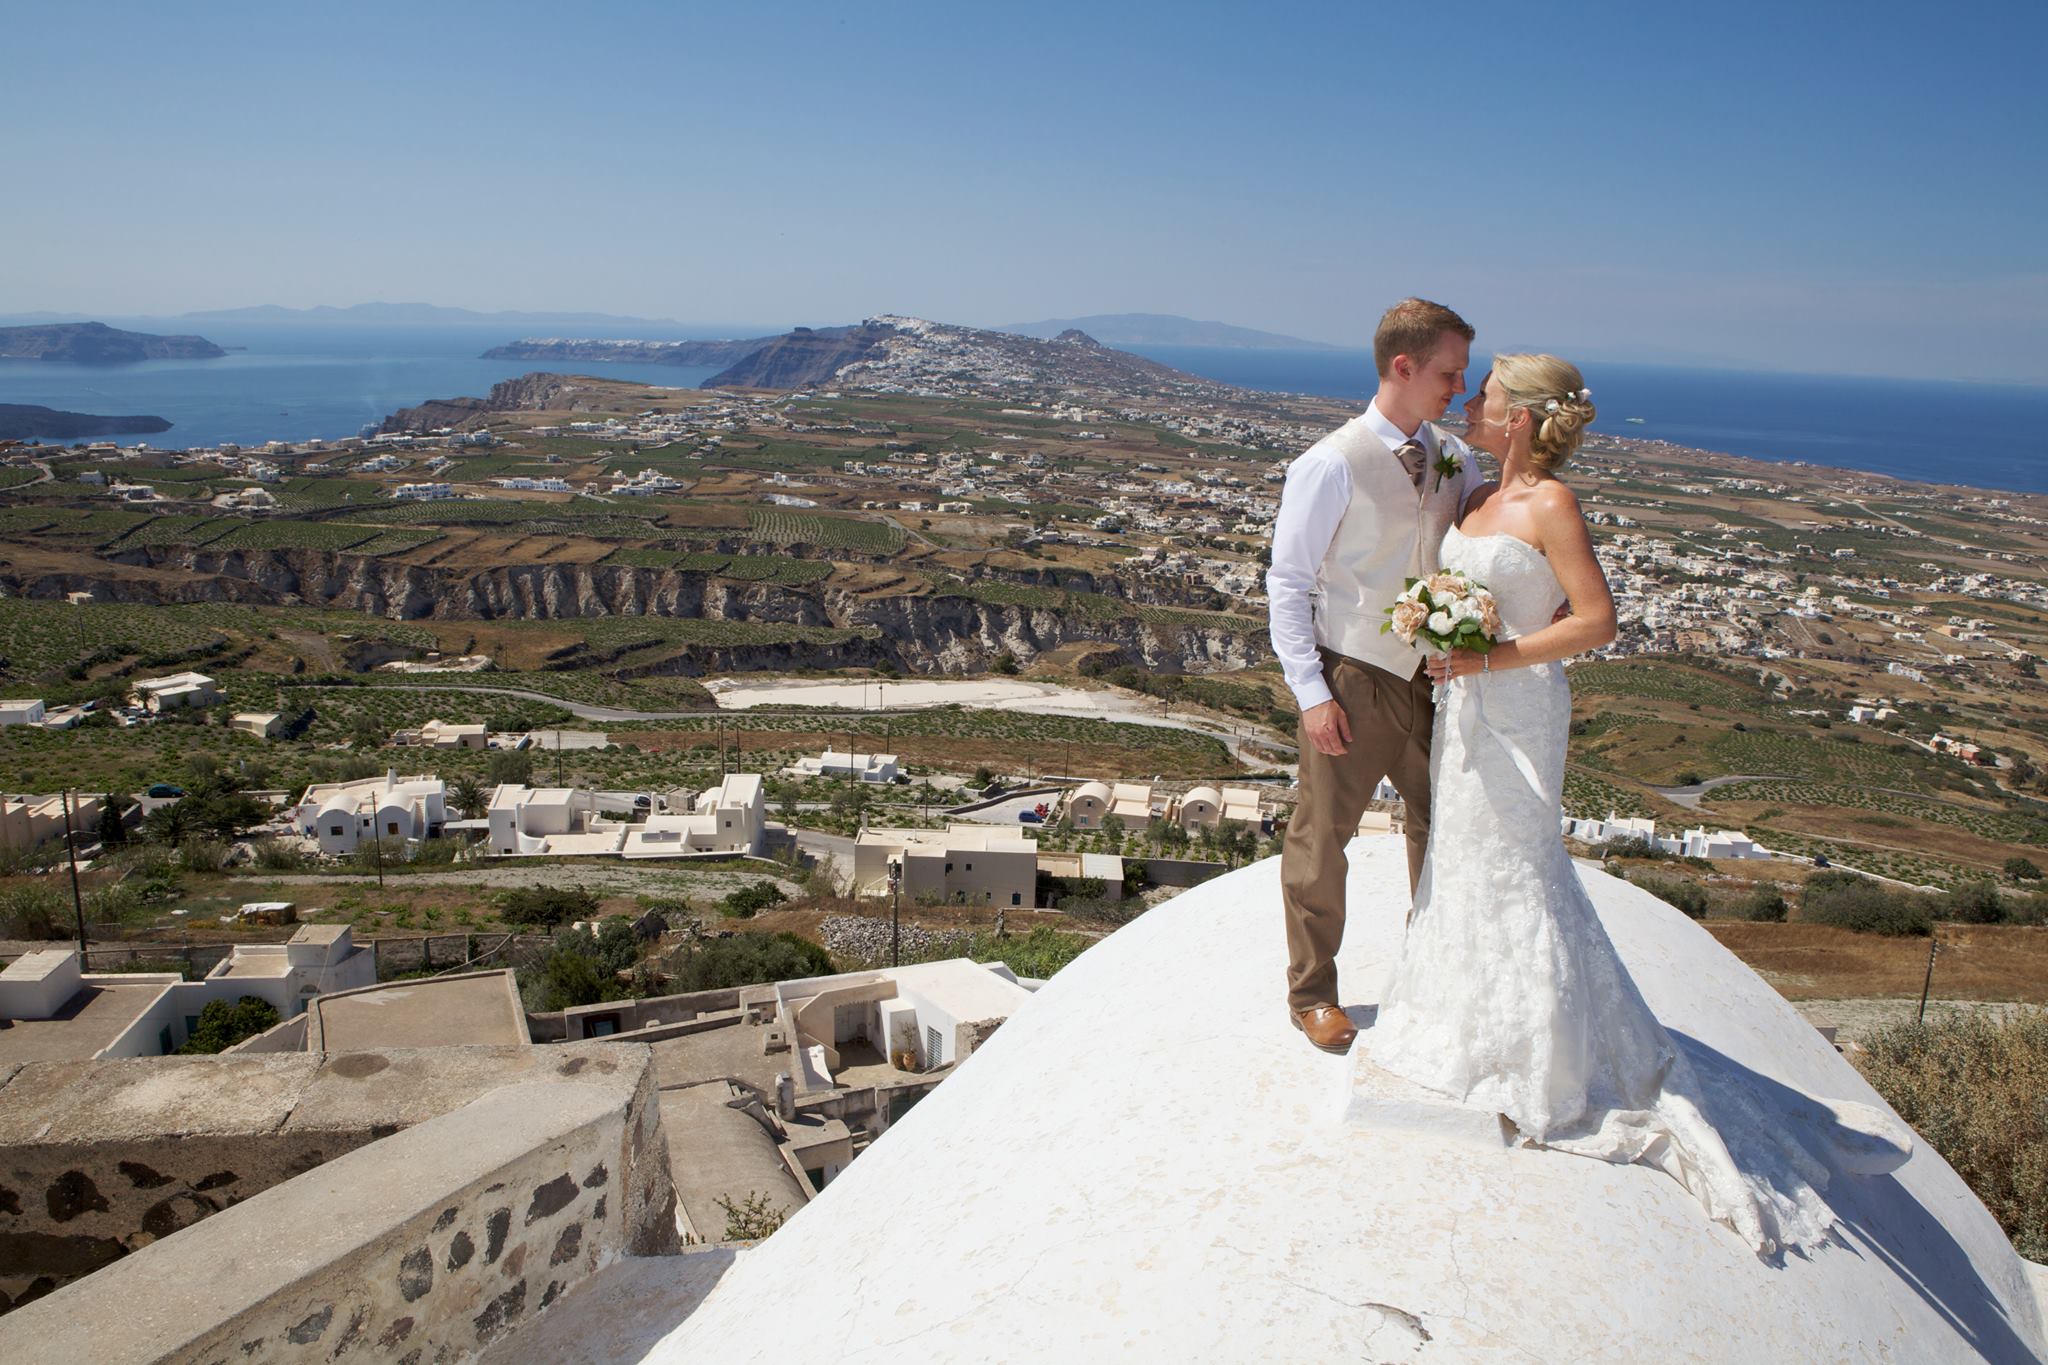 Best Places To Get Married - Weddings Around The World